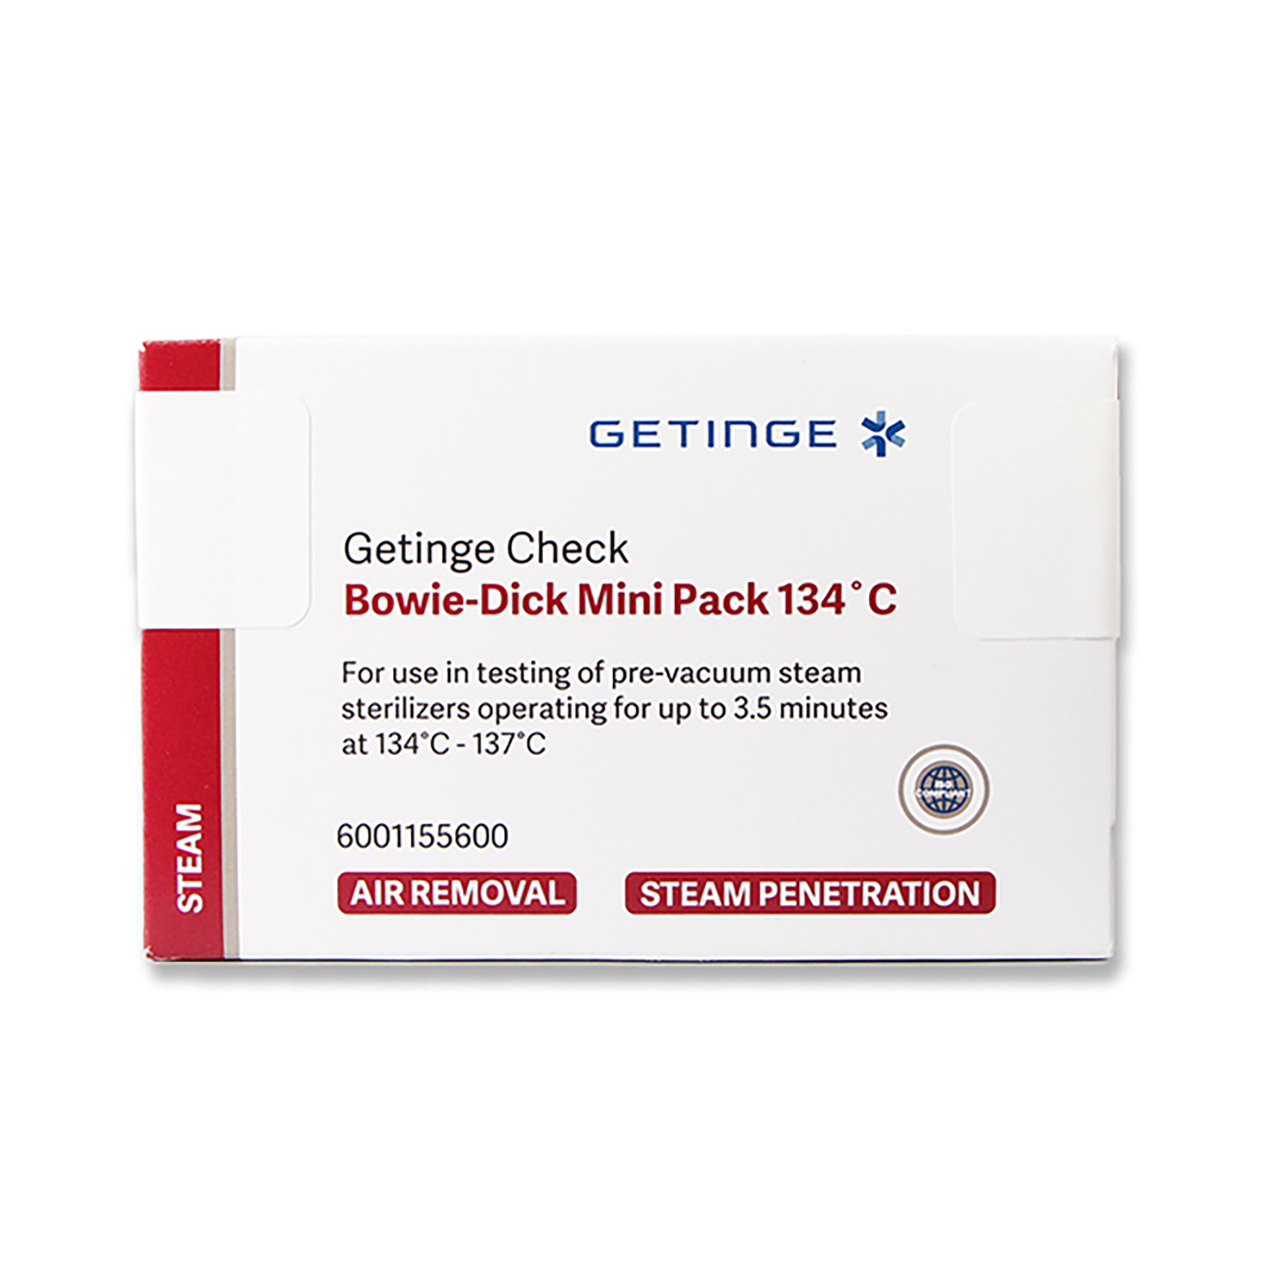 Getinge Check Bowie-Dick Mini Pack is for use in testing pre-vacuum steam sterilizers operating at 134C - 137C